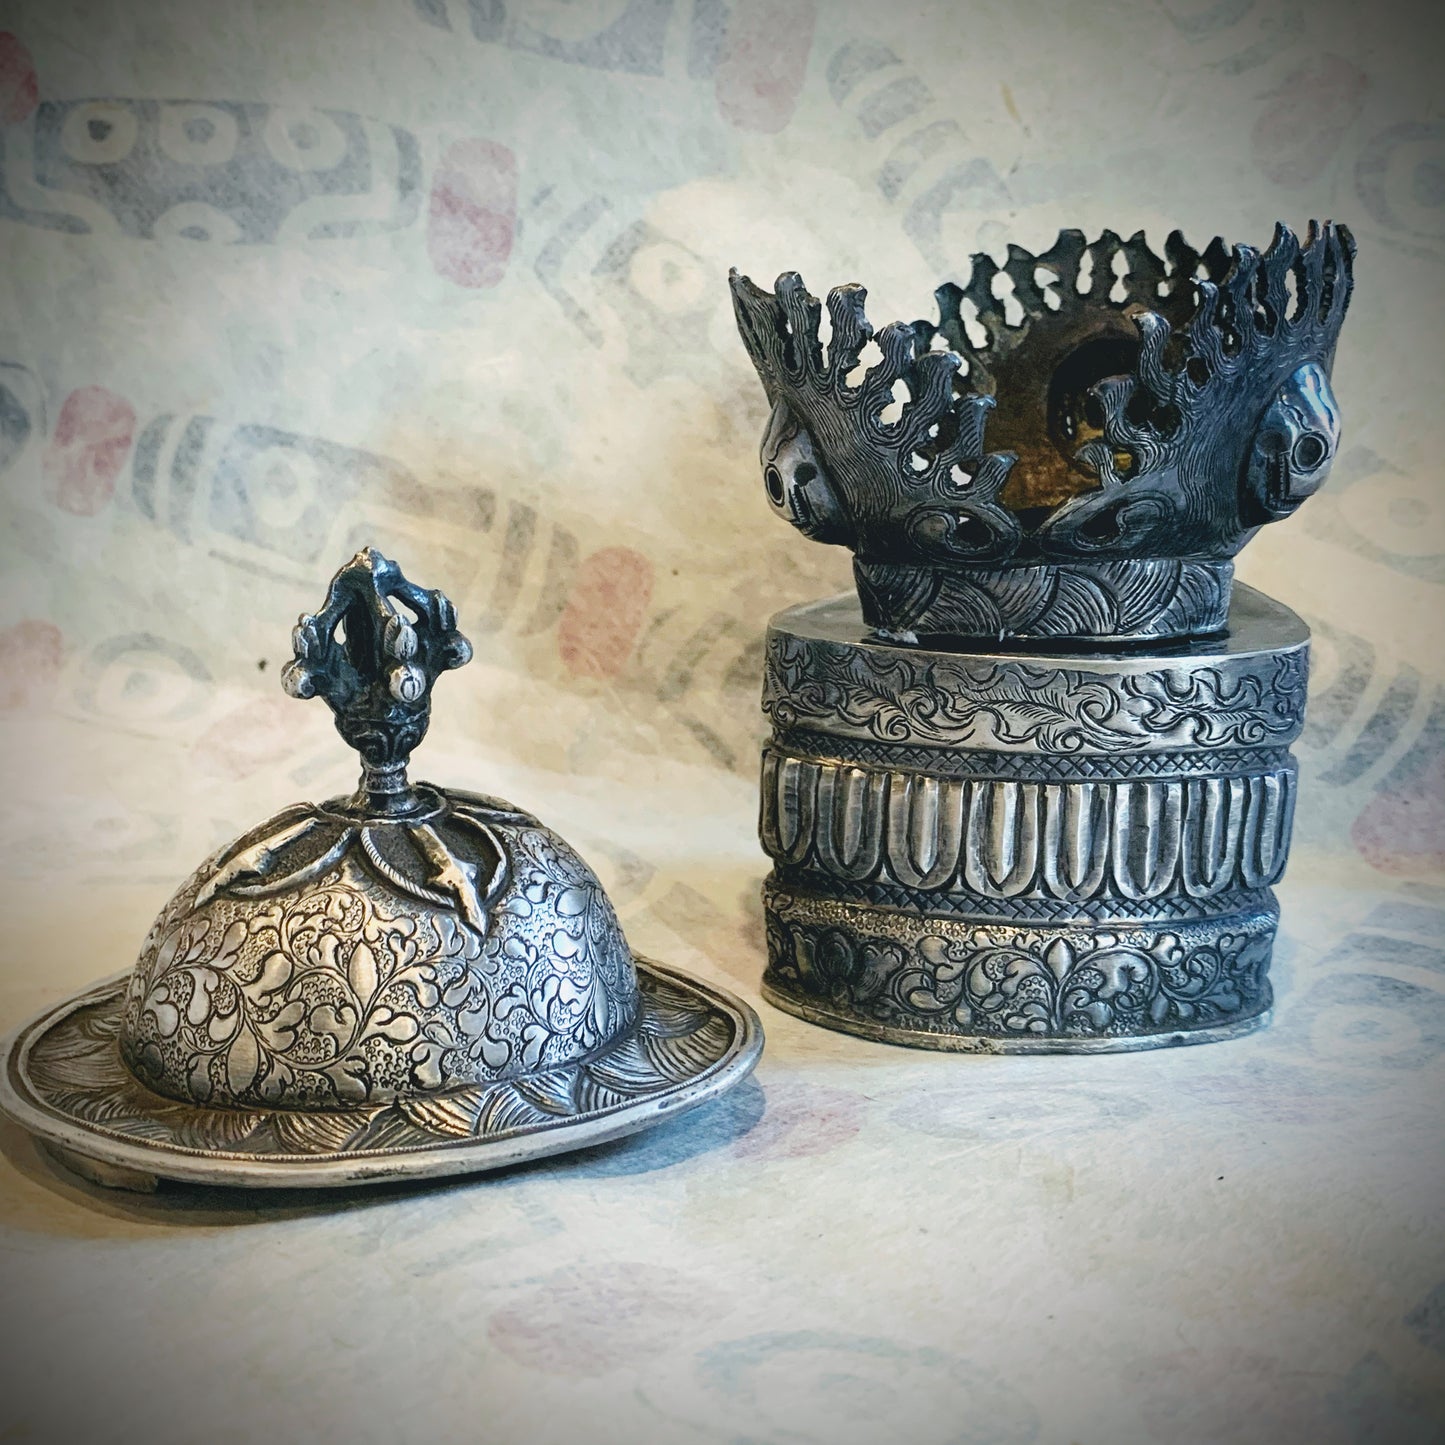 An antique silver kapala stand and cover